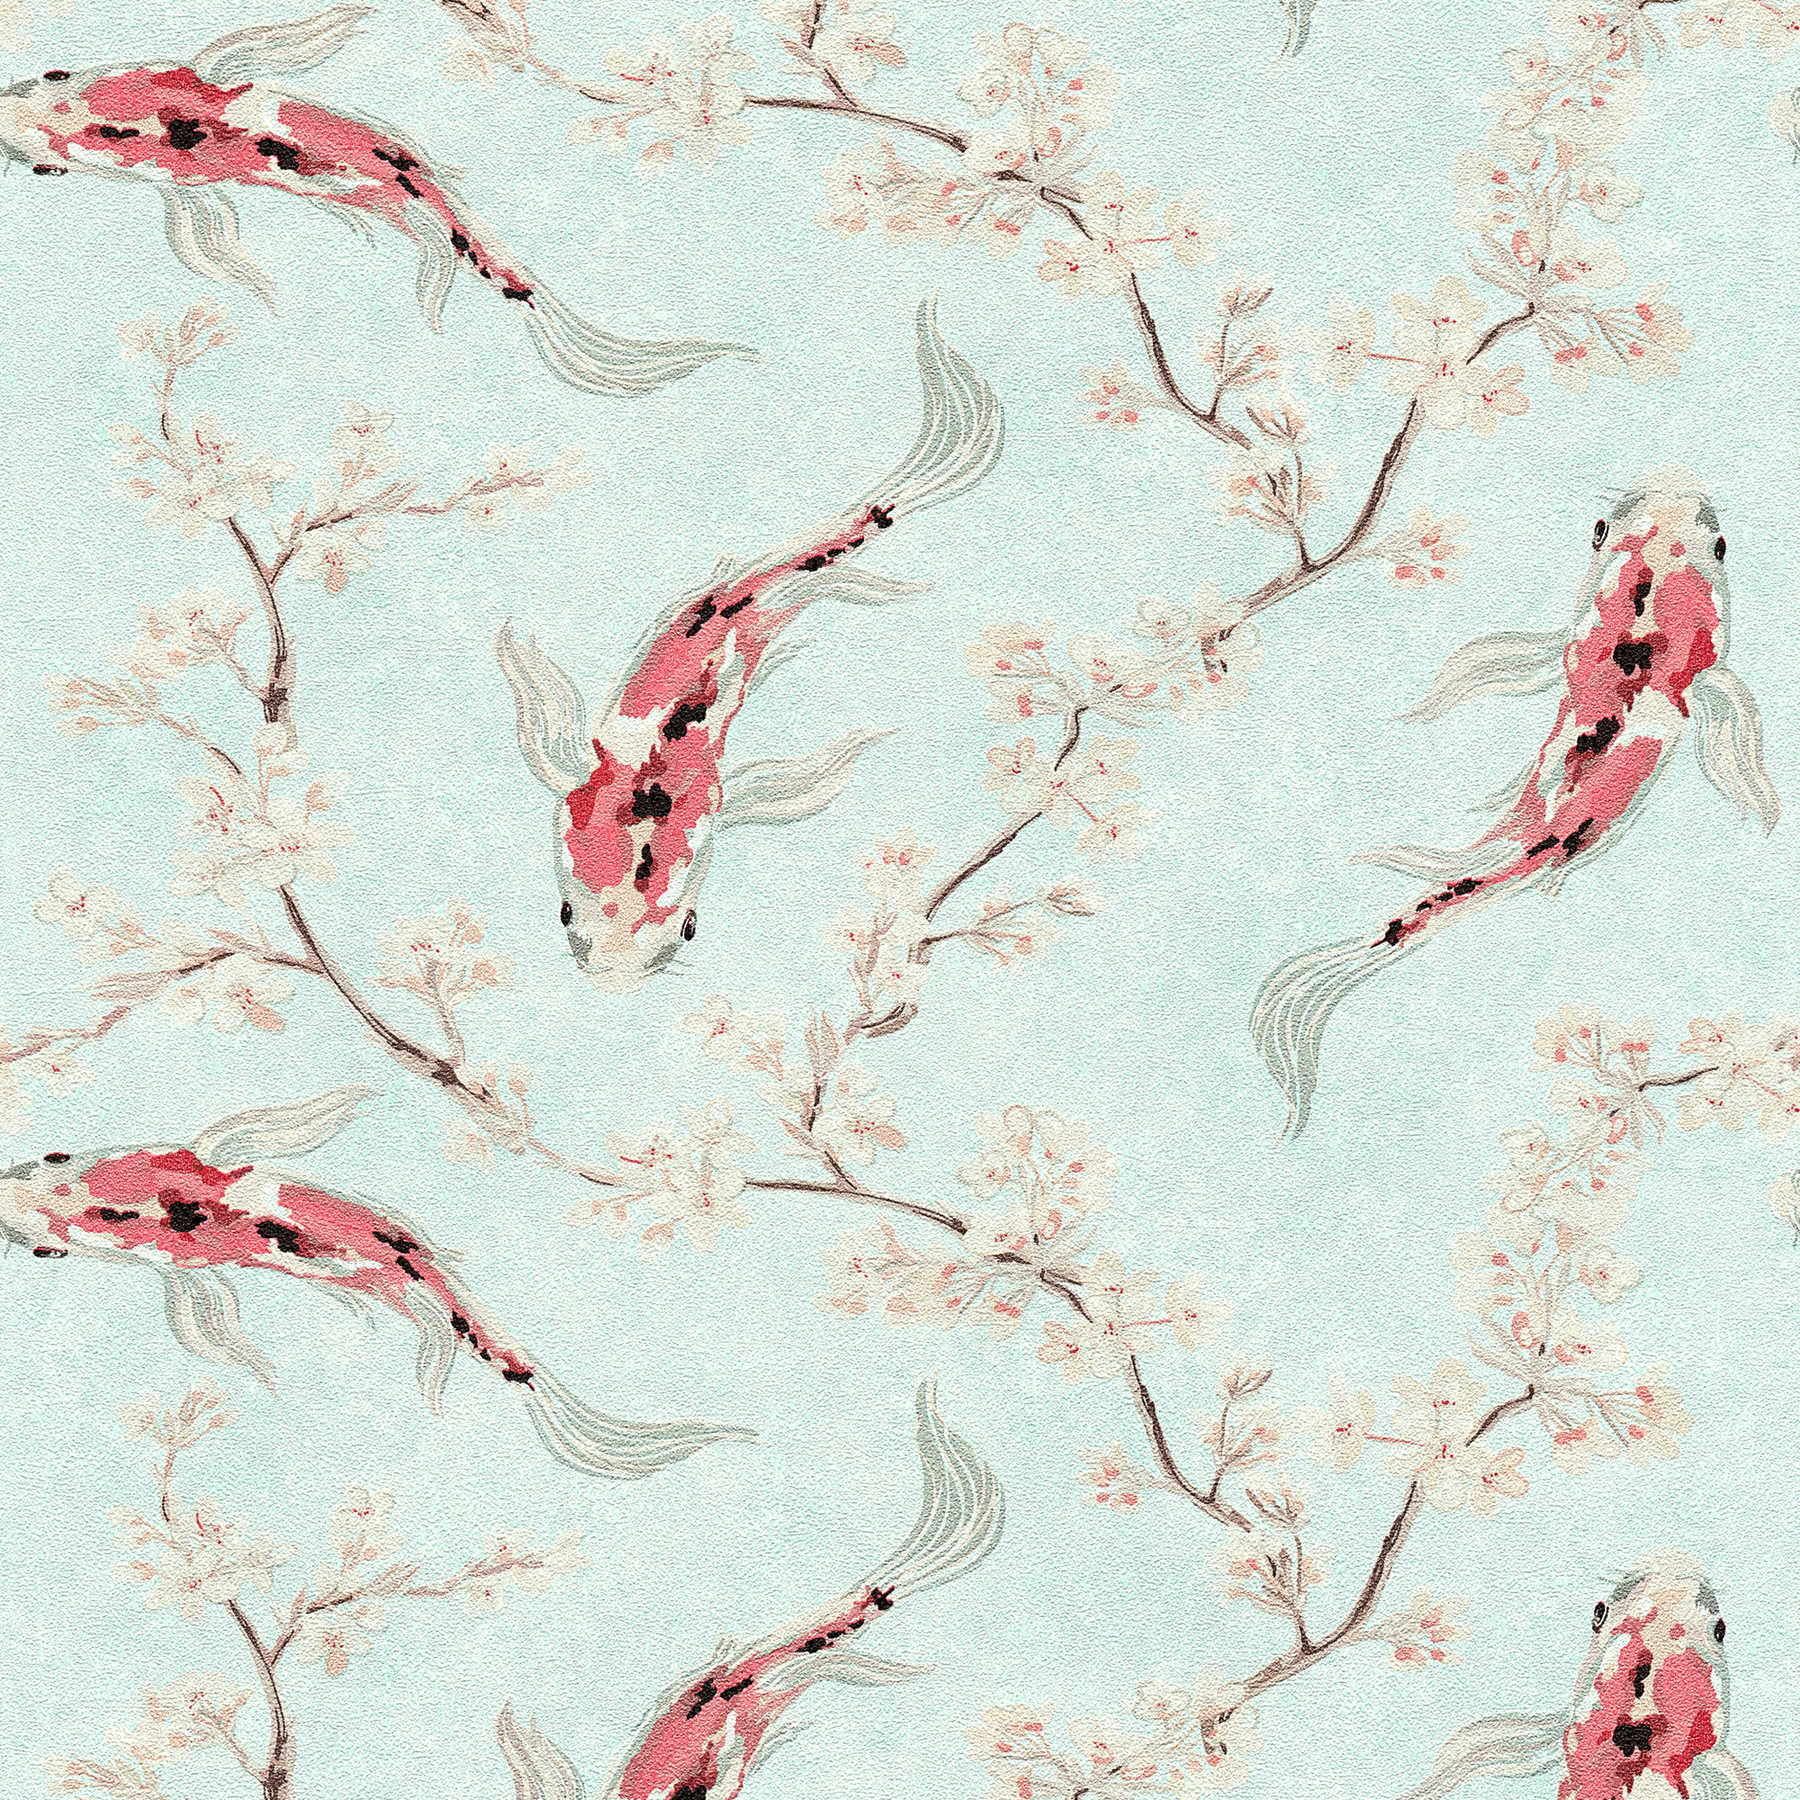         Non-woven wallpaper with koi pattern in Asian style - blue, red, beige
    